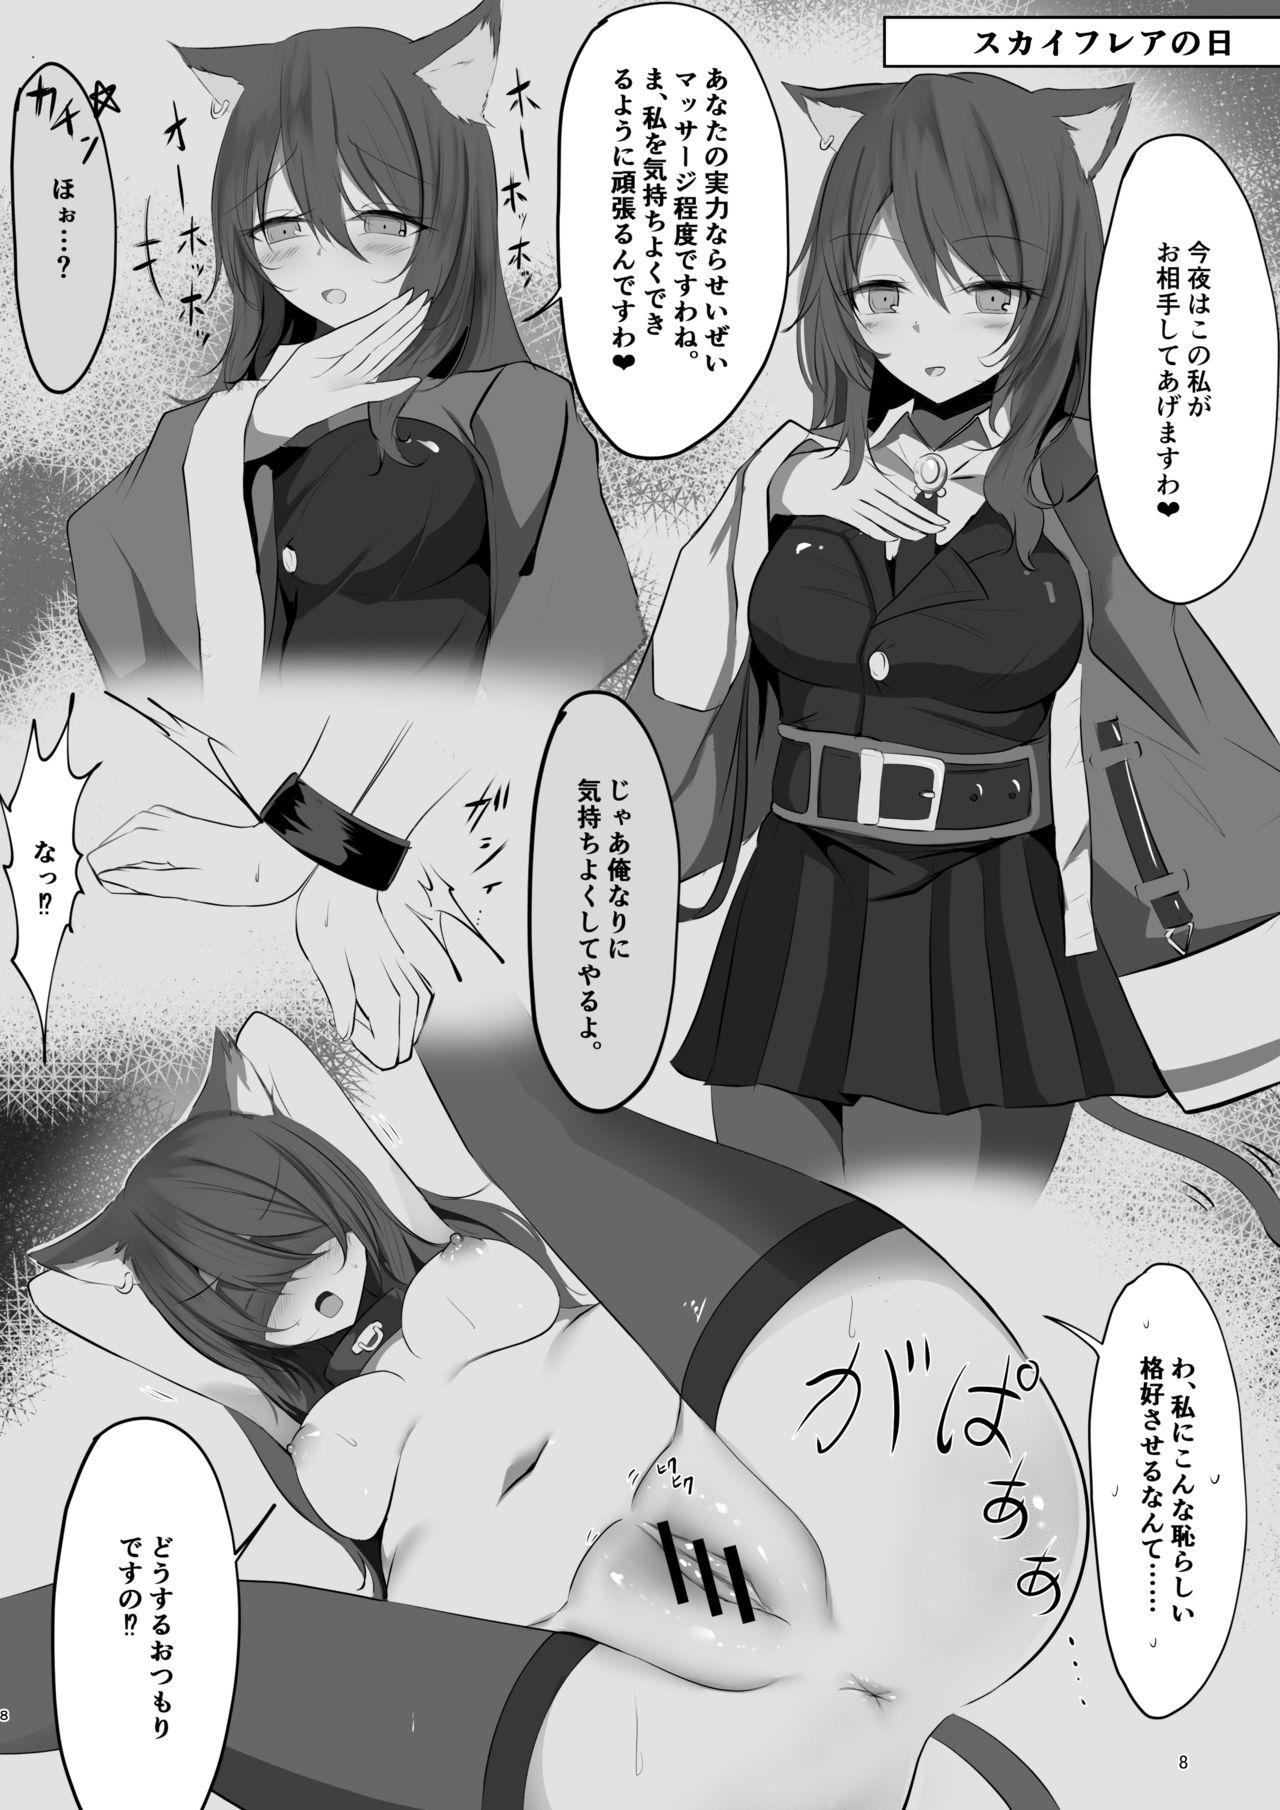 Dykes 夜な夜な扇情作戦記録 - Arknights Anal Play - Page 8